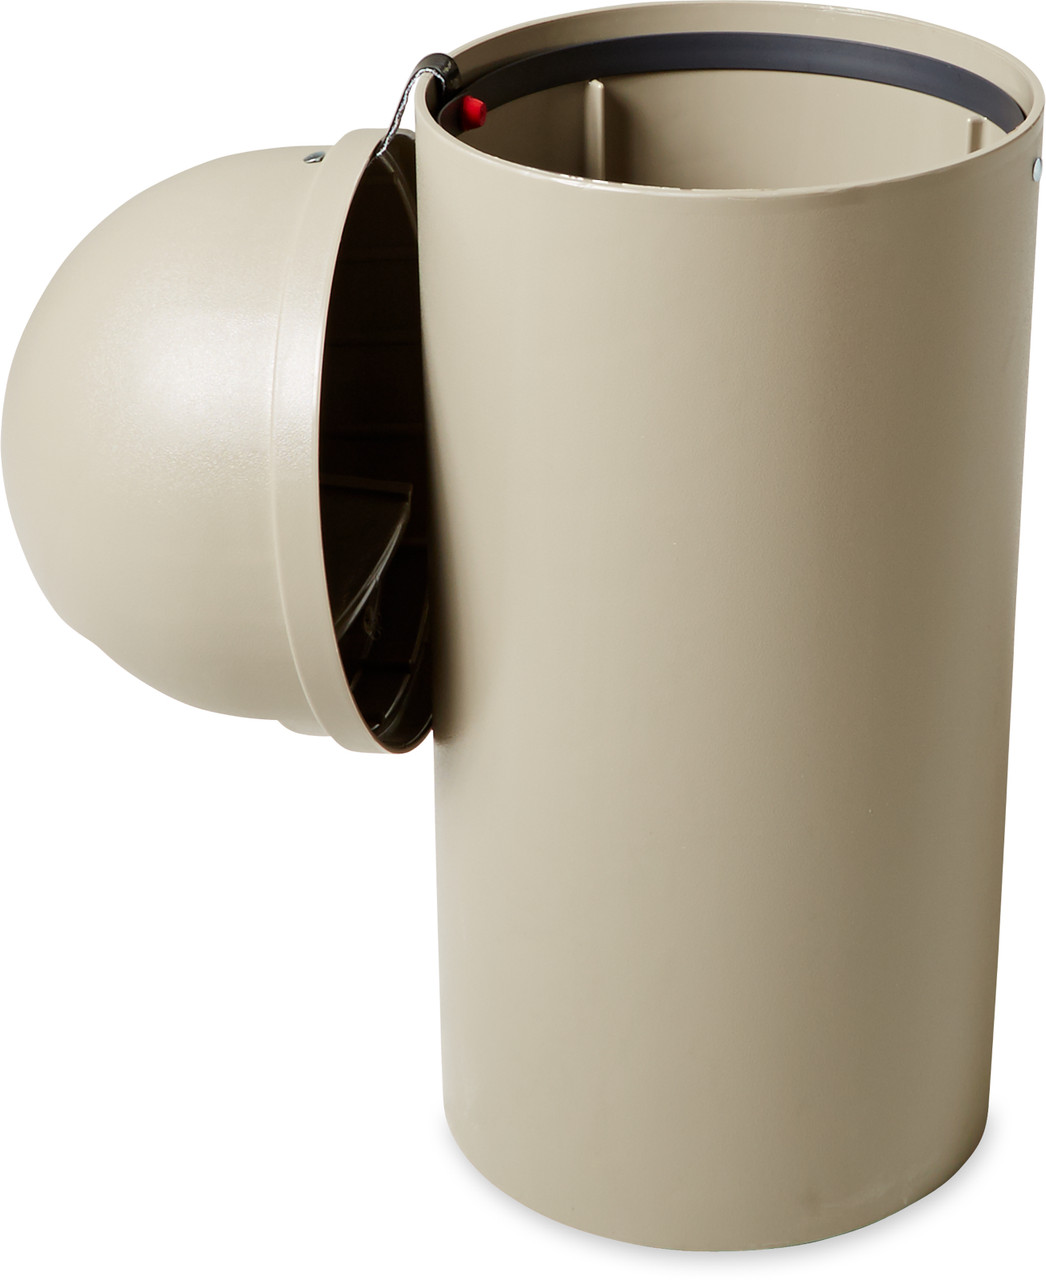 FG816088BEIG - Rubbermaid Marshal Classic Container - 56.8 Ltr - Beige - Lid Removed